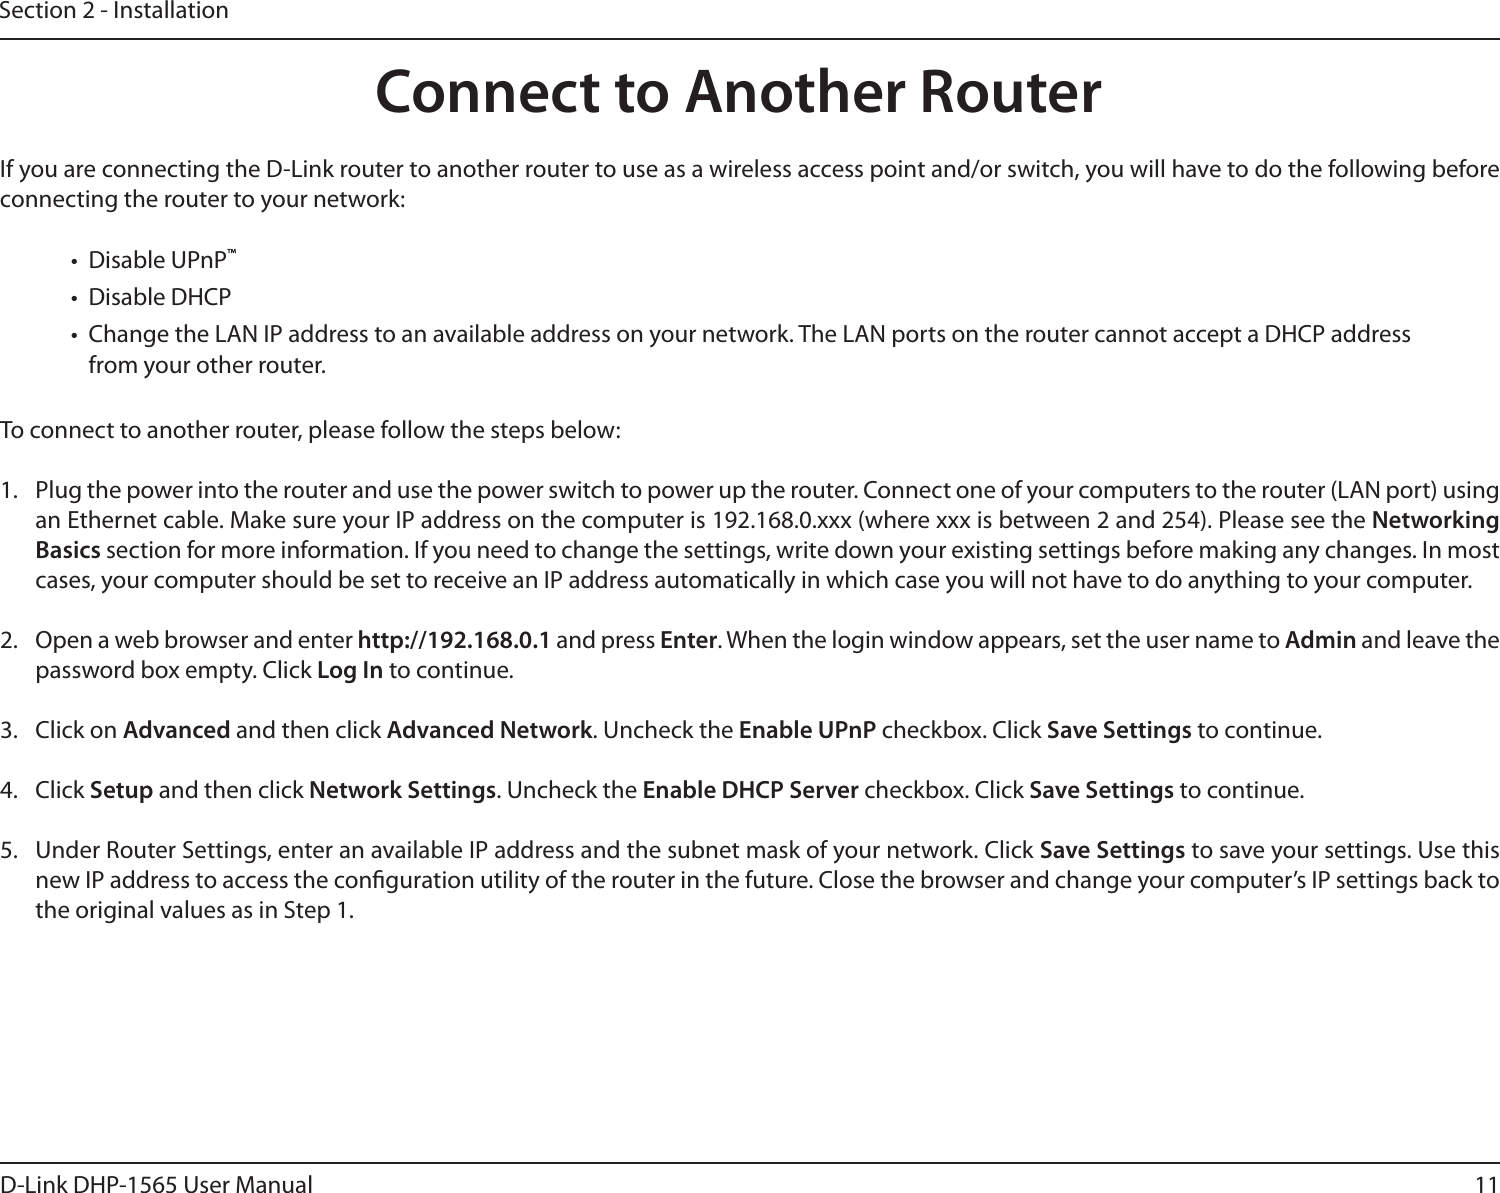 11D-Link DHP-1565 User ManualSection 2 - InstallationIf you are connecting the D-Link router to another router to use as a wireless access point and/or switch, you will have to do the following before connecting the router to your network:•  Disable UPnP™•  Disable DHCP•  Change the LAN IP address to an available address on your network. The LAN ports on the router cannot accept a DHCP address from your other router.To connect to another router, please follow the steps below:1.  Plug the power into the router and use the power switch to power up the router. Connect one of your computers to the router (LAN port) using an Ethernet cable. Make sure your IP address on the computer is 192.168.0.xxx (where xxx is between 2 and 254). Please see the Networking Basics section for more information. If you need to change the settings, write down your existing settings before making any changes. In most cases, your computer should be set to receive an IP address automatically in which case you will not have to do anything to your computer.2.  Open a web browser and enter http://192.168.0.1 and press Enter. When the login window appears, set the user name to Admin and leave the password box empty. Click Log In to continue.3.  Click on Advanced and then click Advanced Network. Uncheck the Enable UPnP checkbox. Click Save Settings to continue. 4.  Click Setup and then click Network Settings. Uncheck the Enable DHCP Server checkbox. Click Save Settings to continue.5.  Under Router Settings, enter an available IP address and the subnet mask of your network. Click Save Settings to save your settings. Use this new IP address to access the conguration utility of the router in the future. Close the browser and change your computer’s IP settings back to the original values as in Step 1.Connect to Another Router